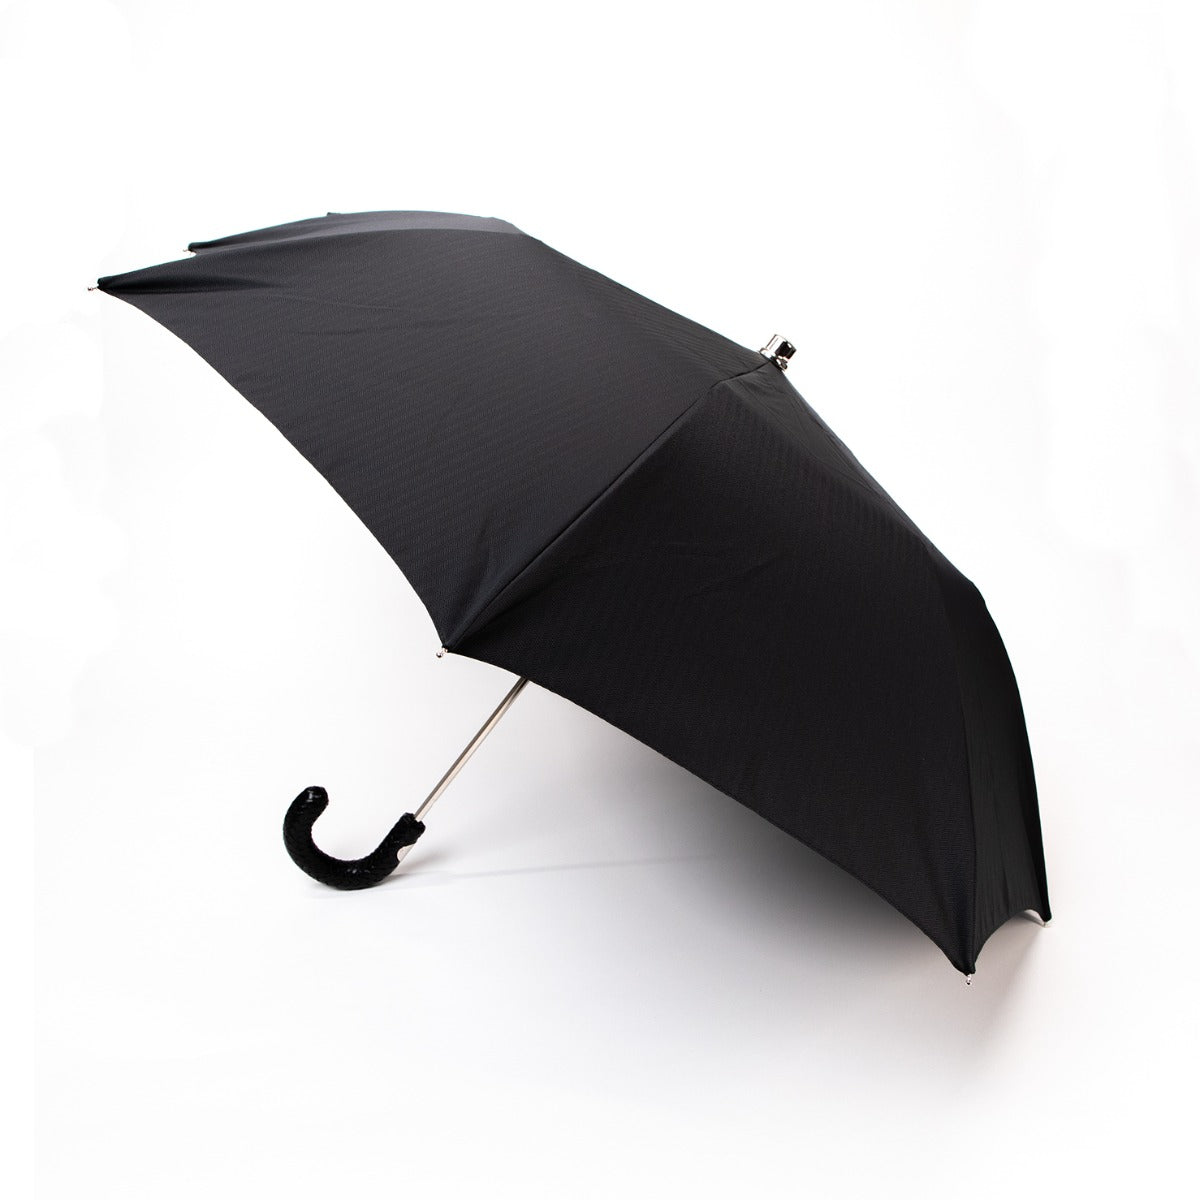 A Black Herringbone Canopy Travel Umbrella with a Woven Leather Handle by KirbyAllison.com in Milan.